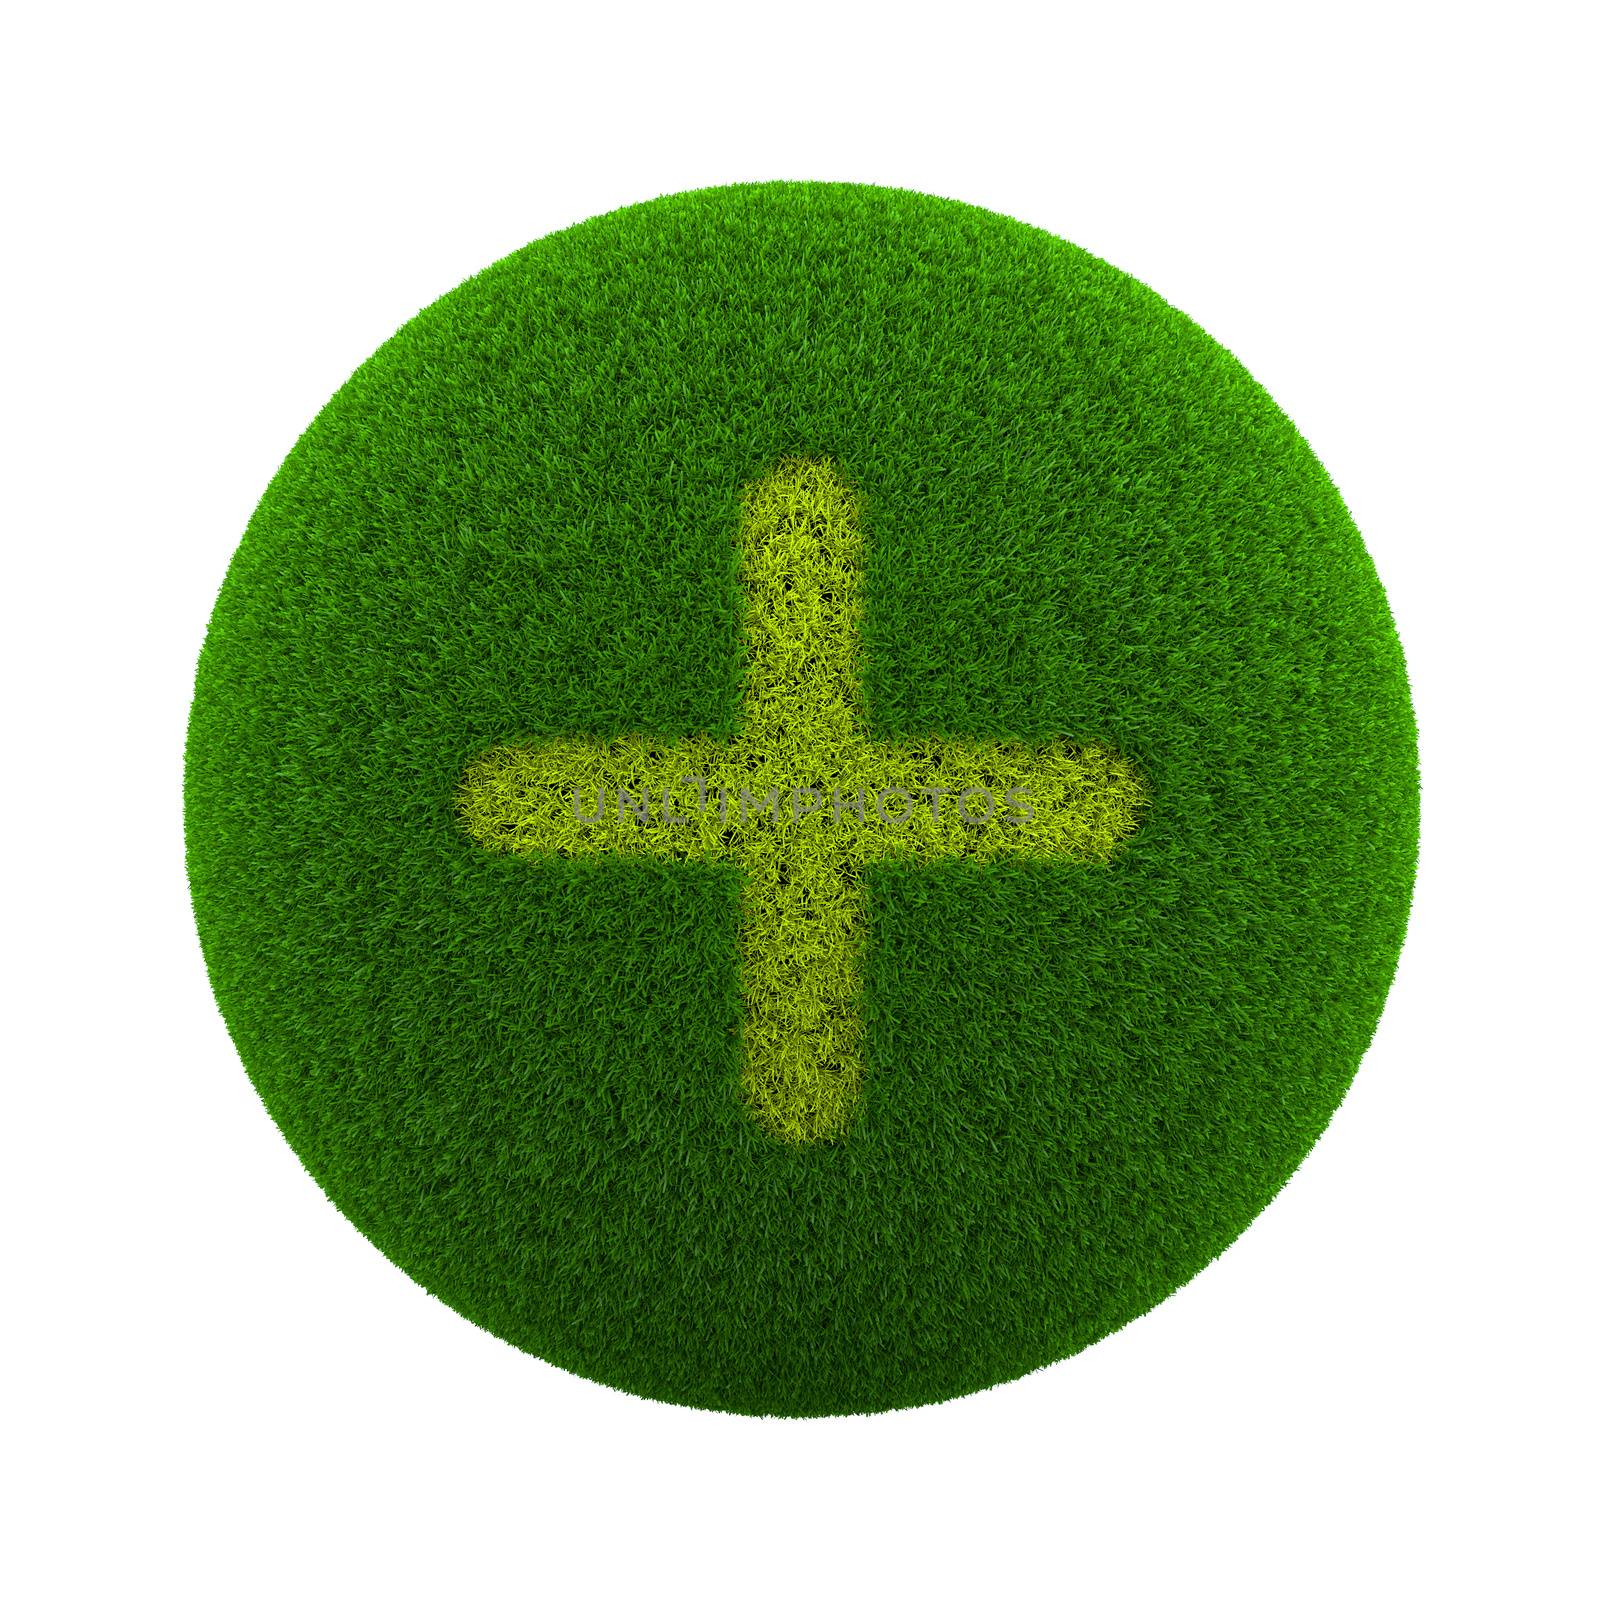 Grass Sphere Plus Sign Icon by make